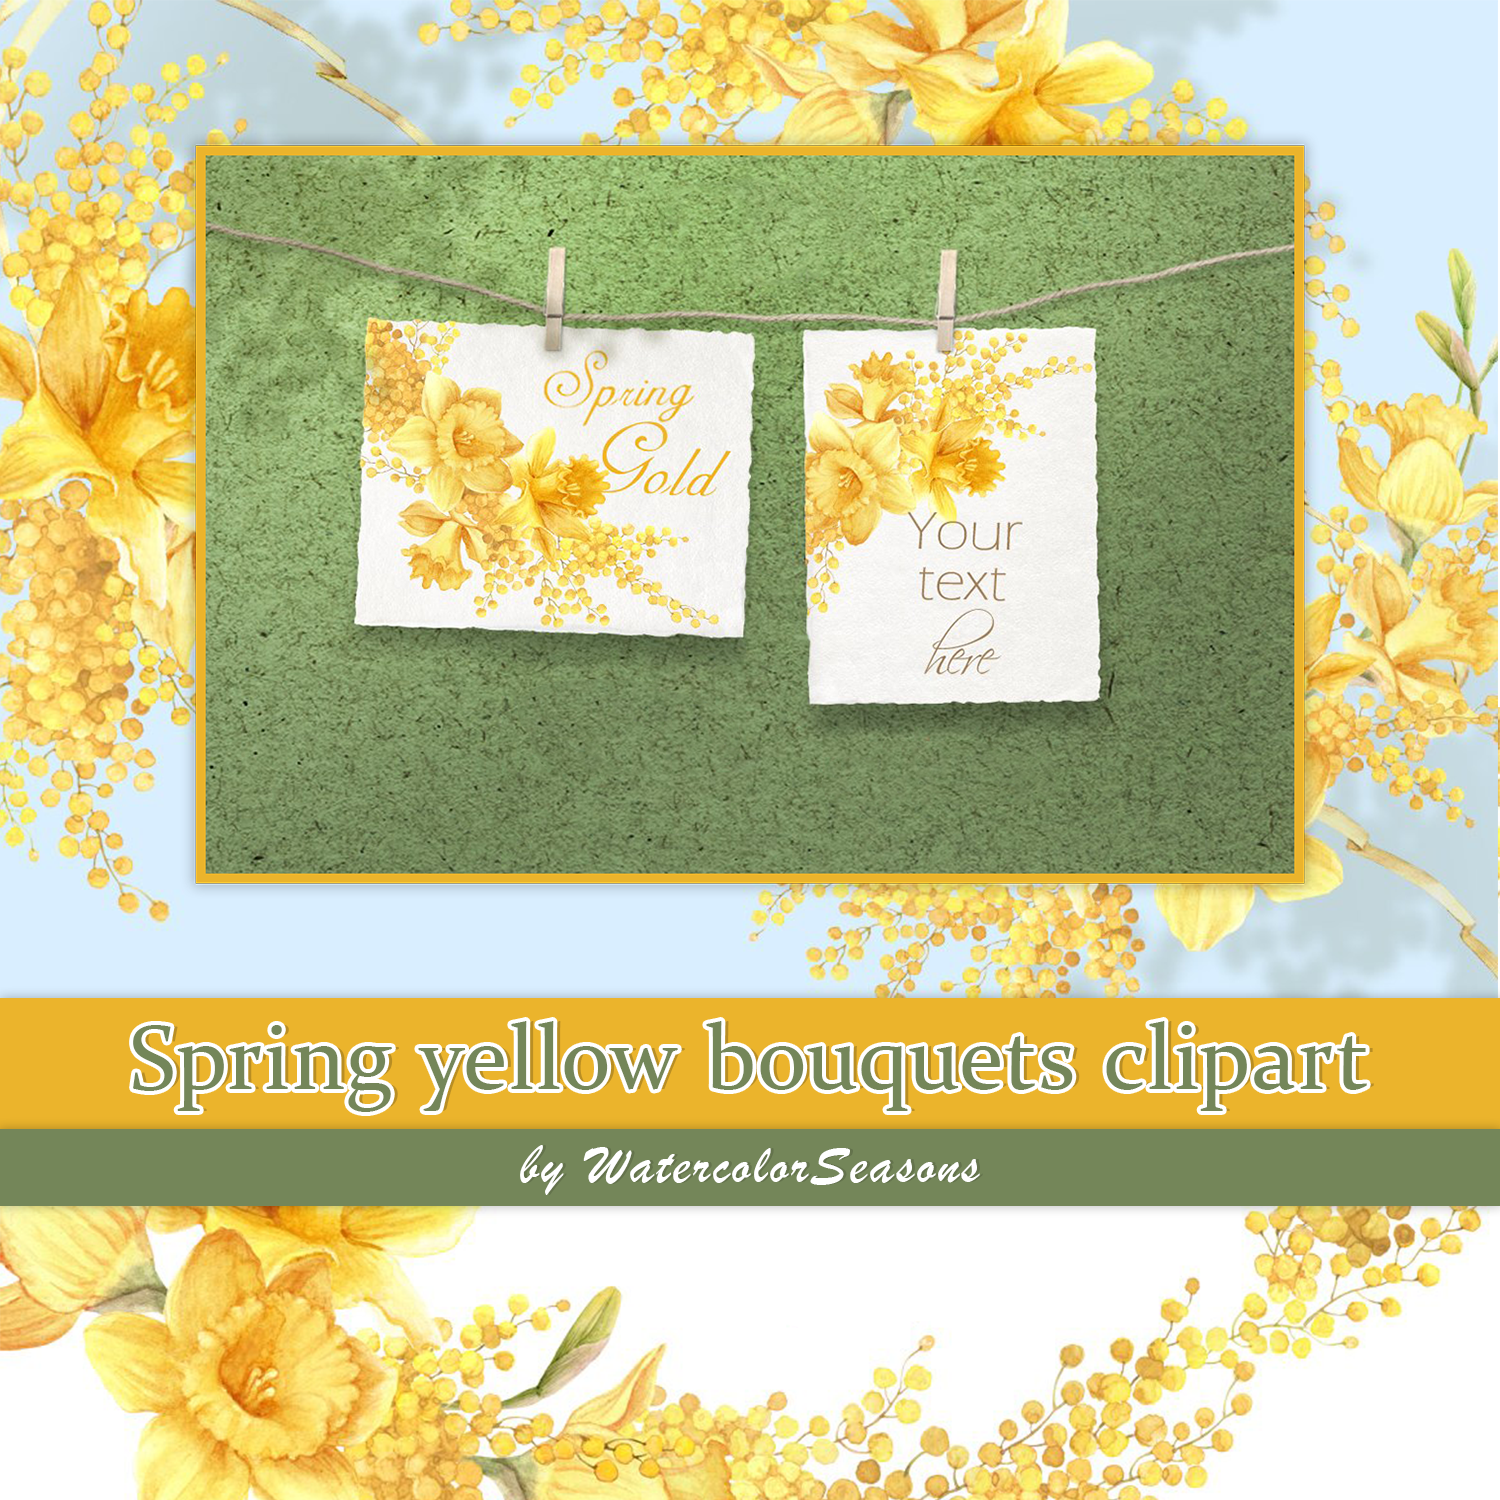 Prints of spring yellow bouquets clipart.